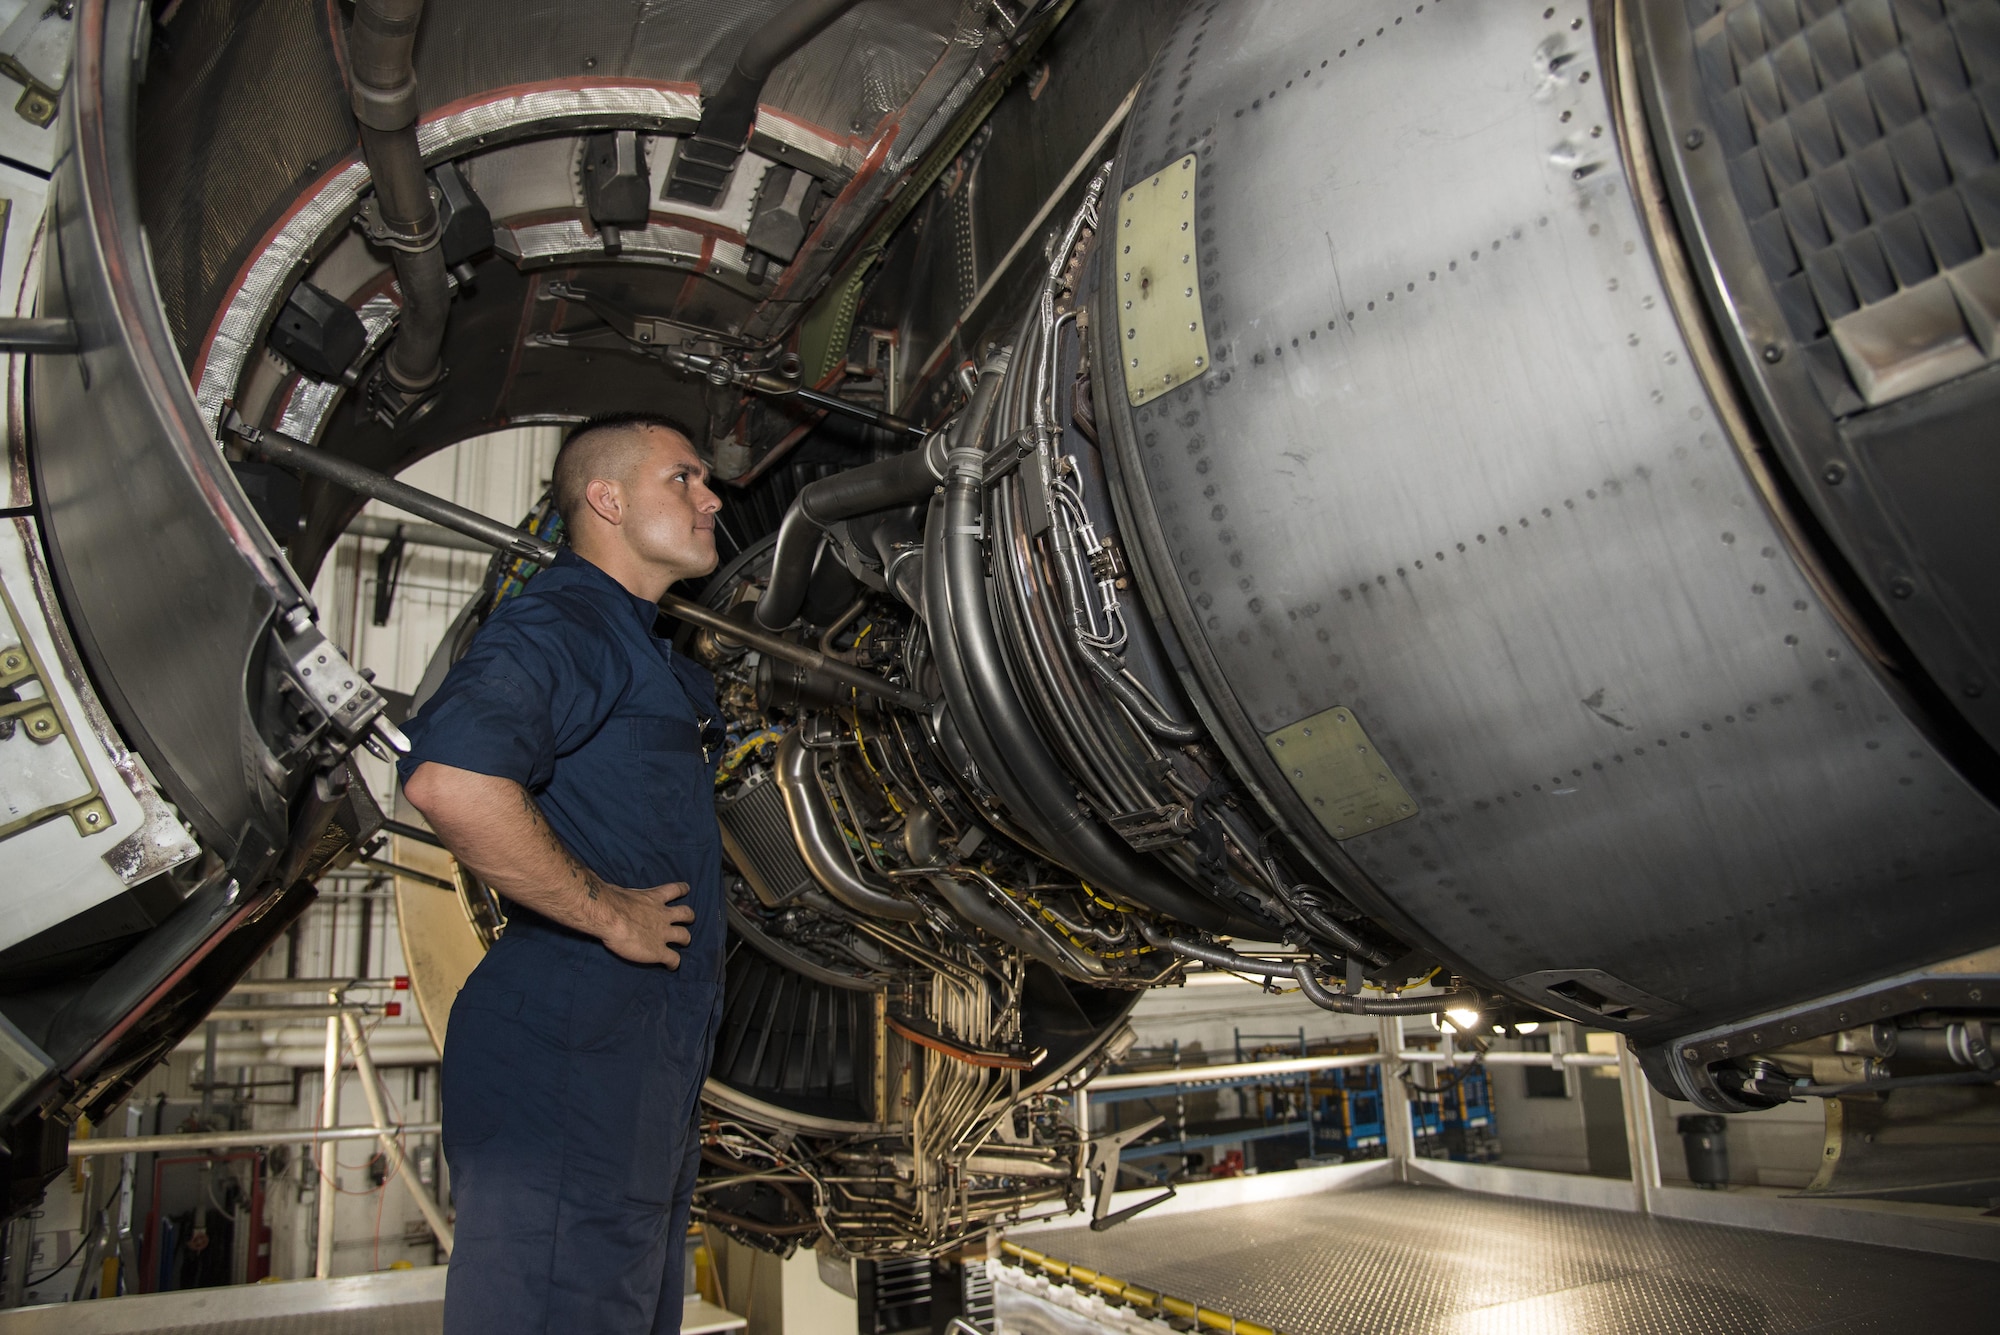 Senior Airman Austin Toniolo, 736th Aircraft Maintenance Squadron crew chief, inspects an engine on a C-17A Globemaster III while standing on a C-17 Engine Maintenance Platform on Aug. 1, 2016, at Dover Air Force Base, Del. Each aircraft is inspected every 120 days in planned routine inspections called home station checks. (U.S. Air Force photo by Senior Airman Aaron J. Jenne)